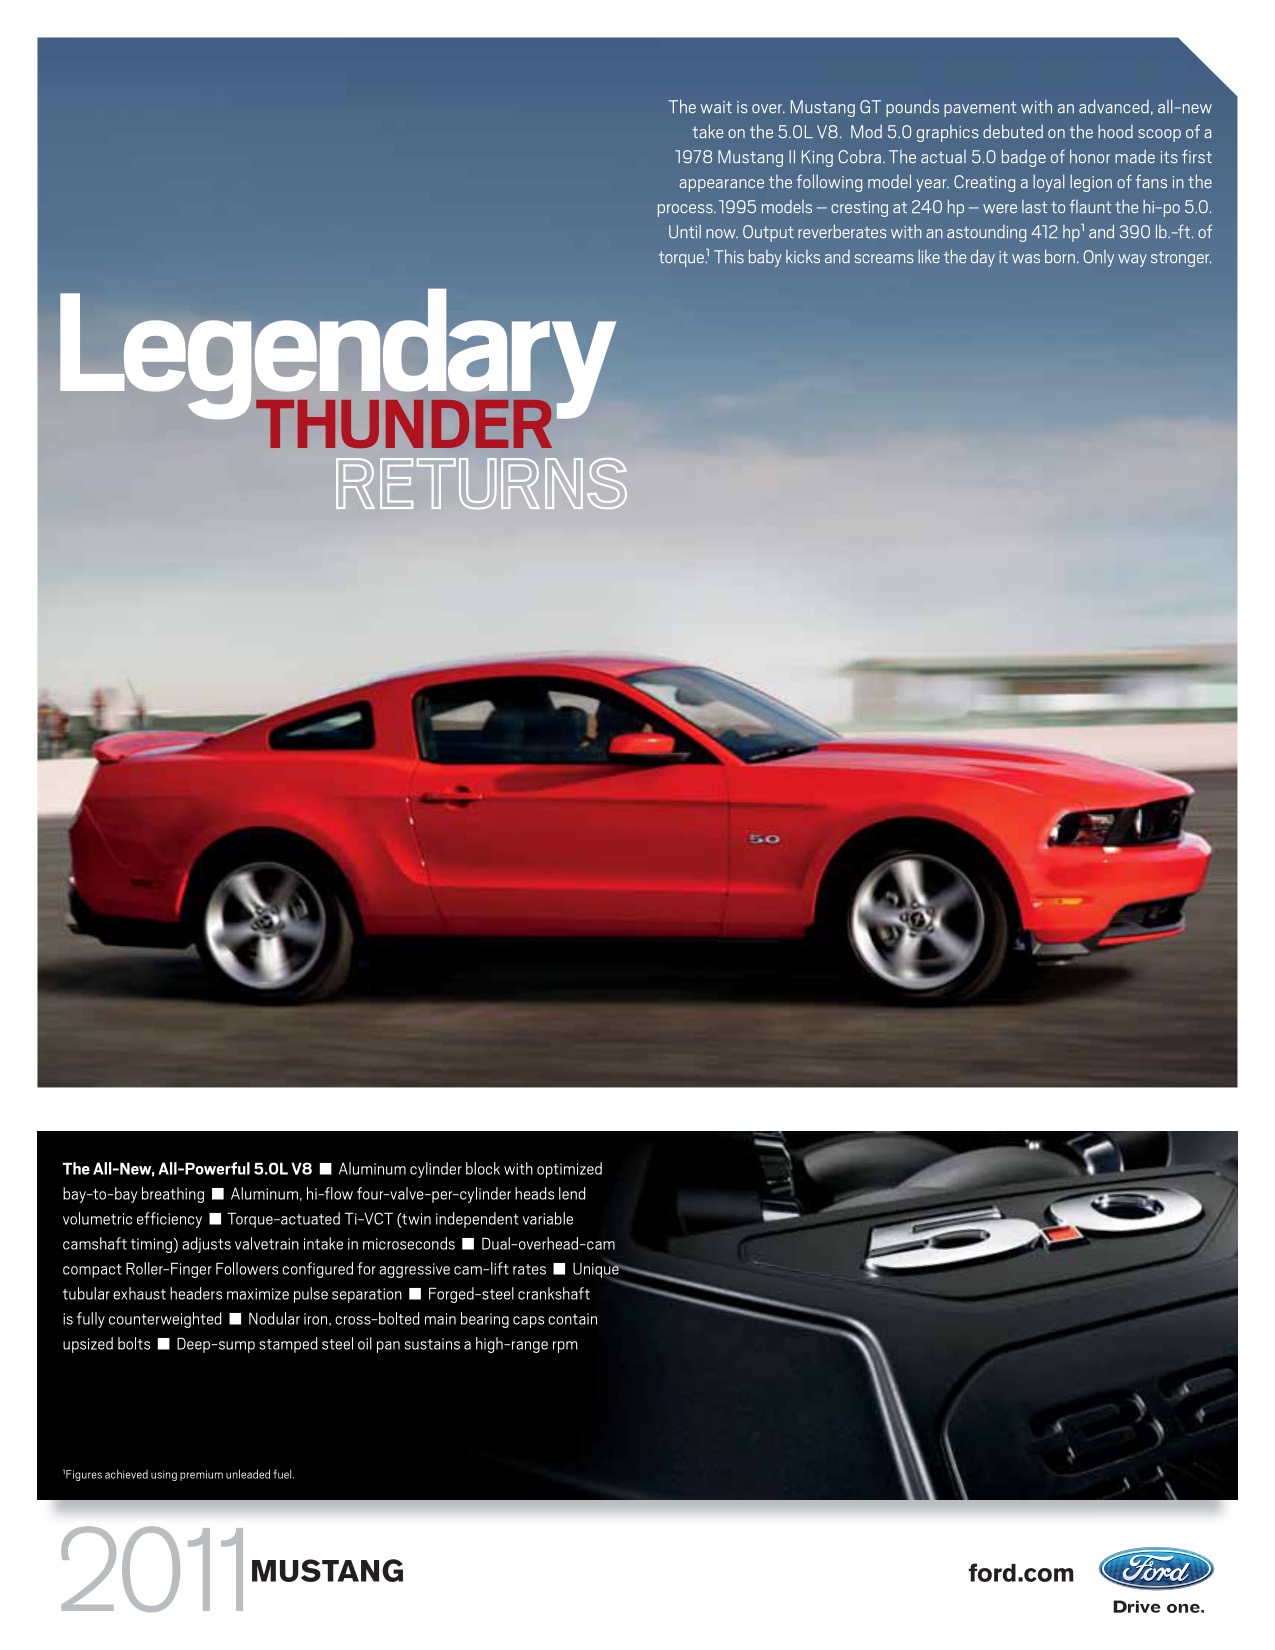 2011 Ford Mustang Brochure Page 21